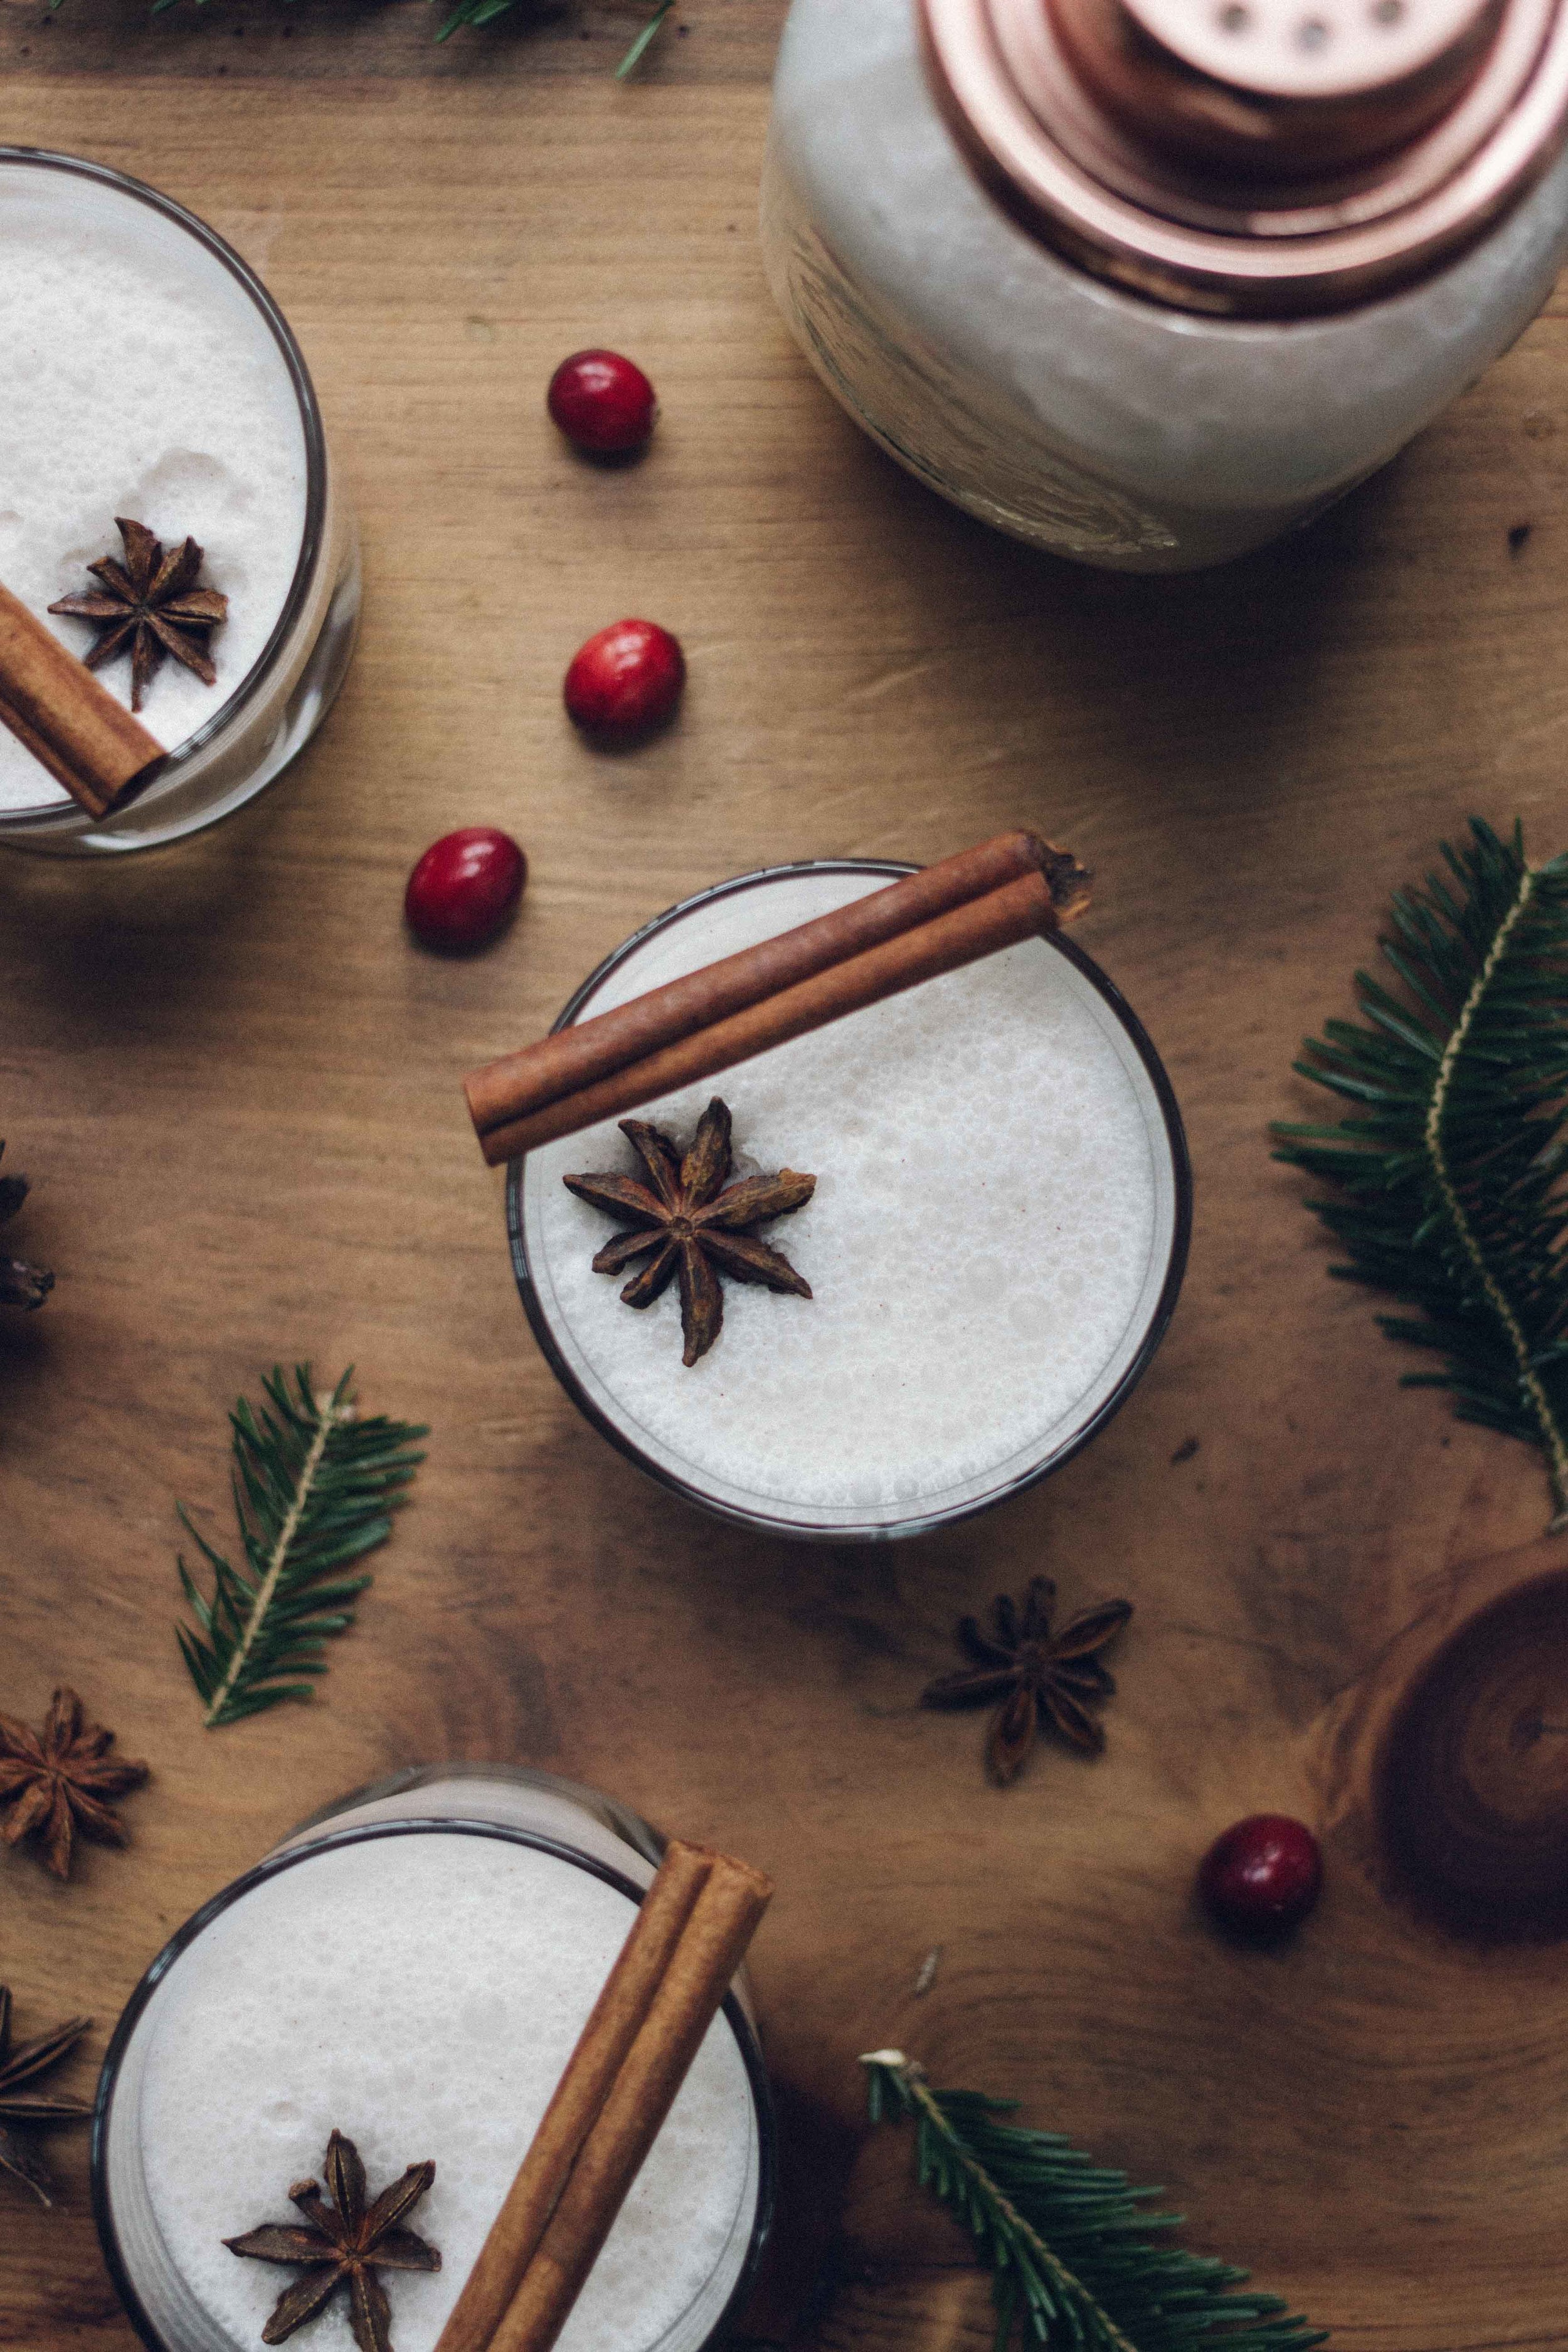 Puerto Rican Lactose Free Coquito - The perfect coconut Christmas cocktail to get you in the festive holiday spirit - The Well Essentials - #puertorico #christmas #holidaycocktails #coquito